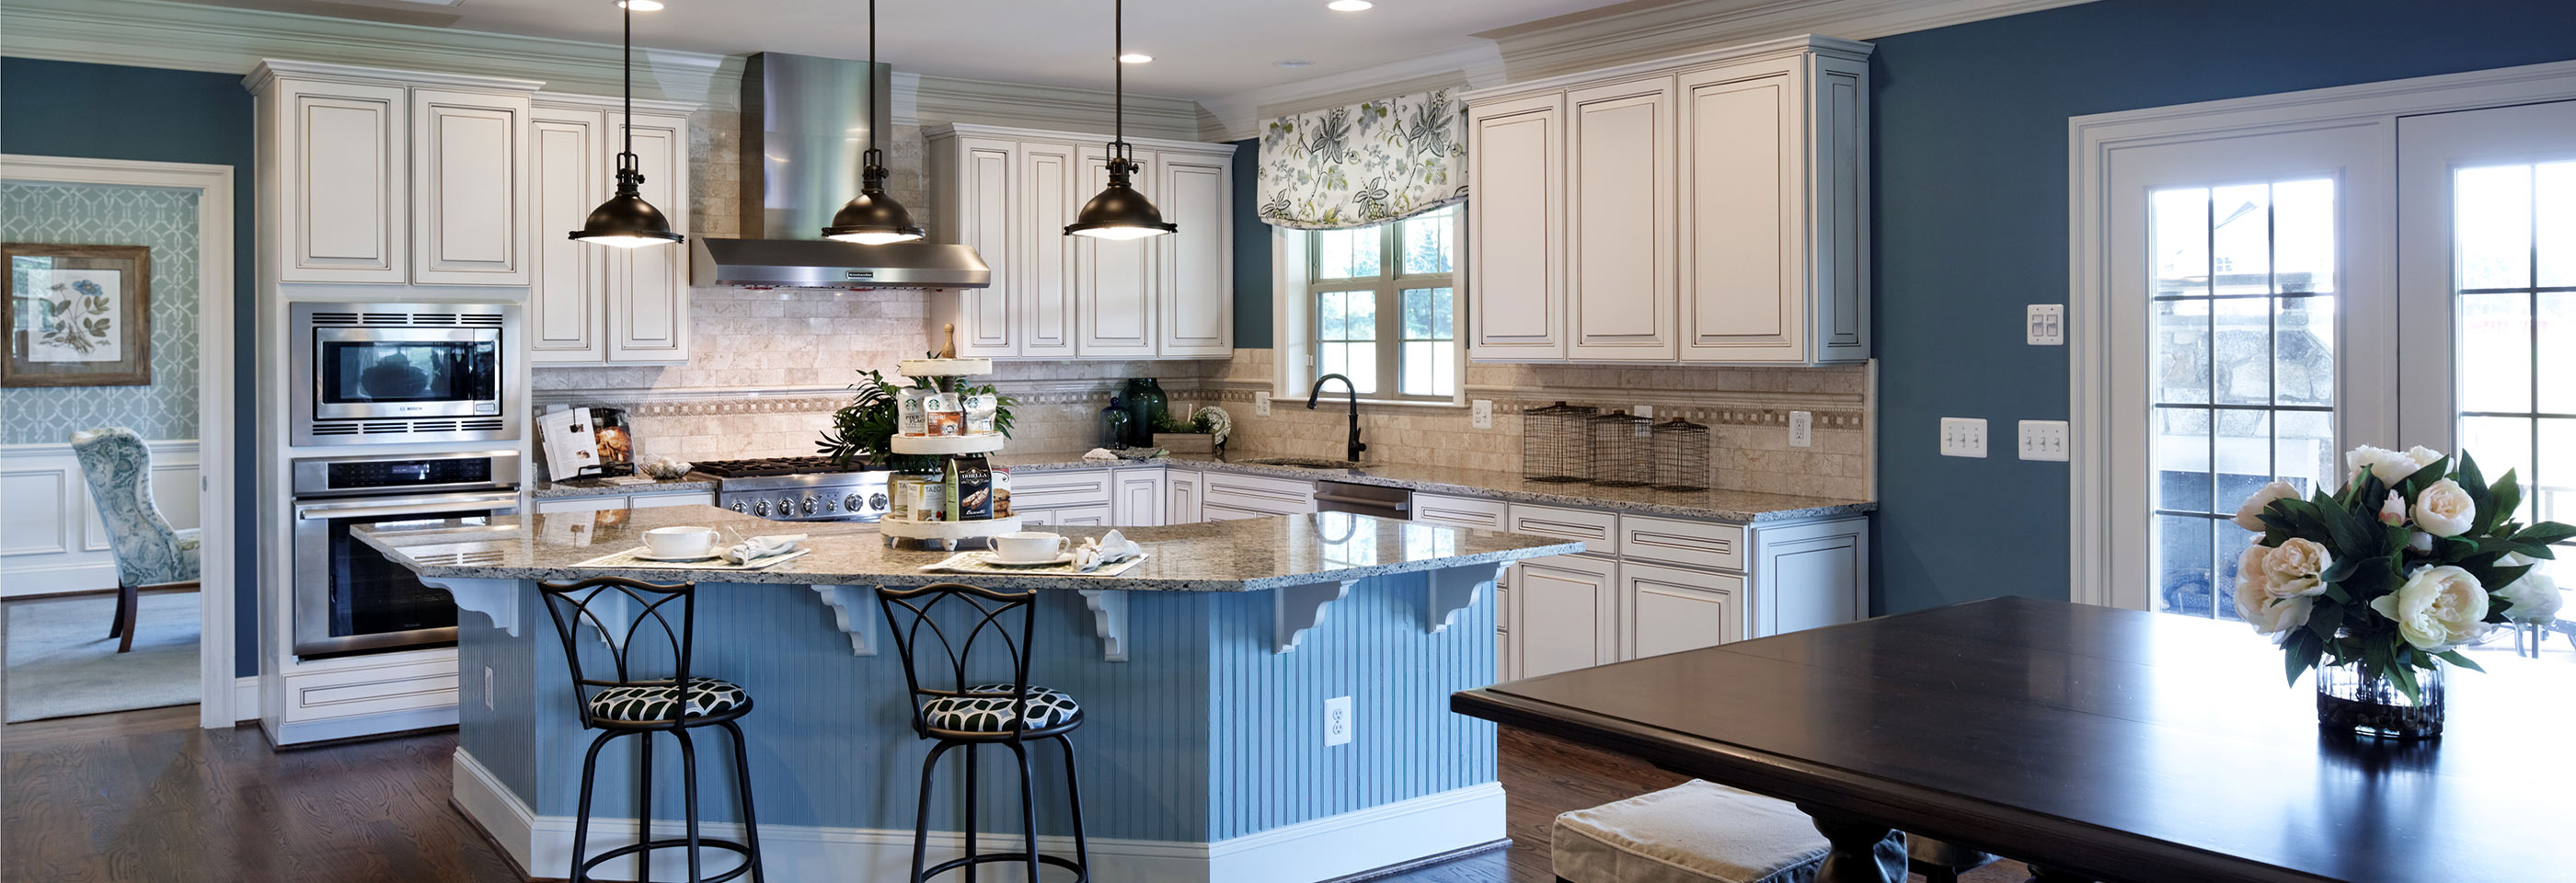 Gourmet Kitchen, Custom Single Family Homes in Montgomery County MD